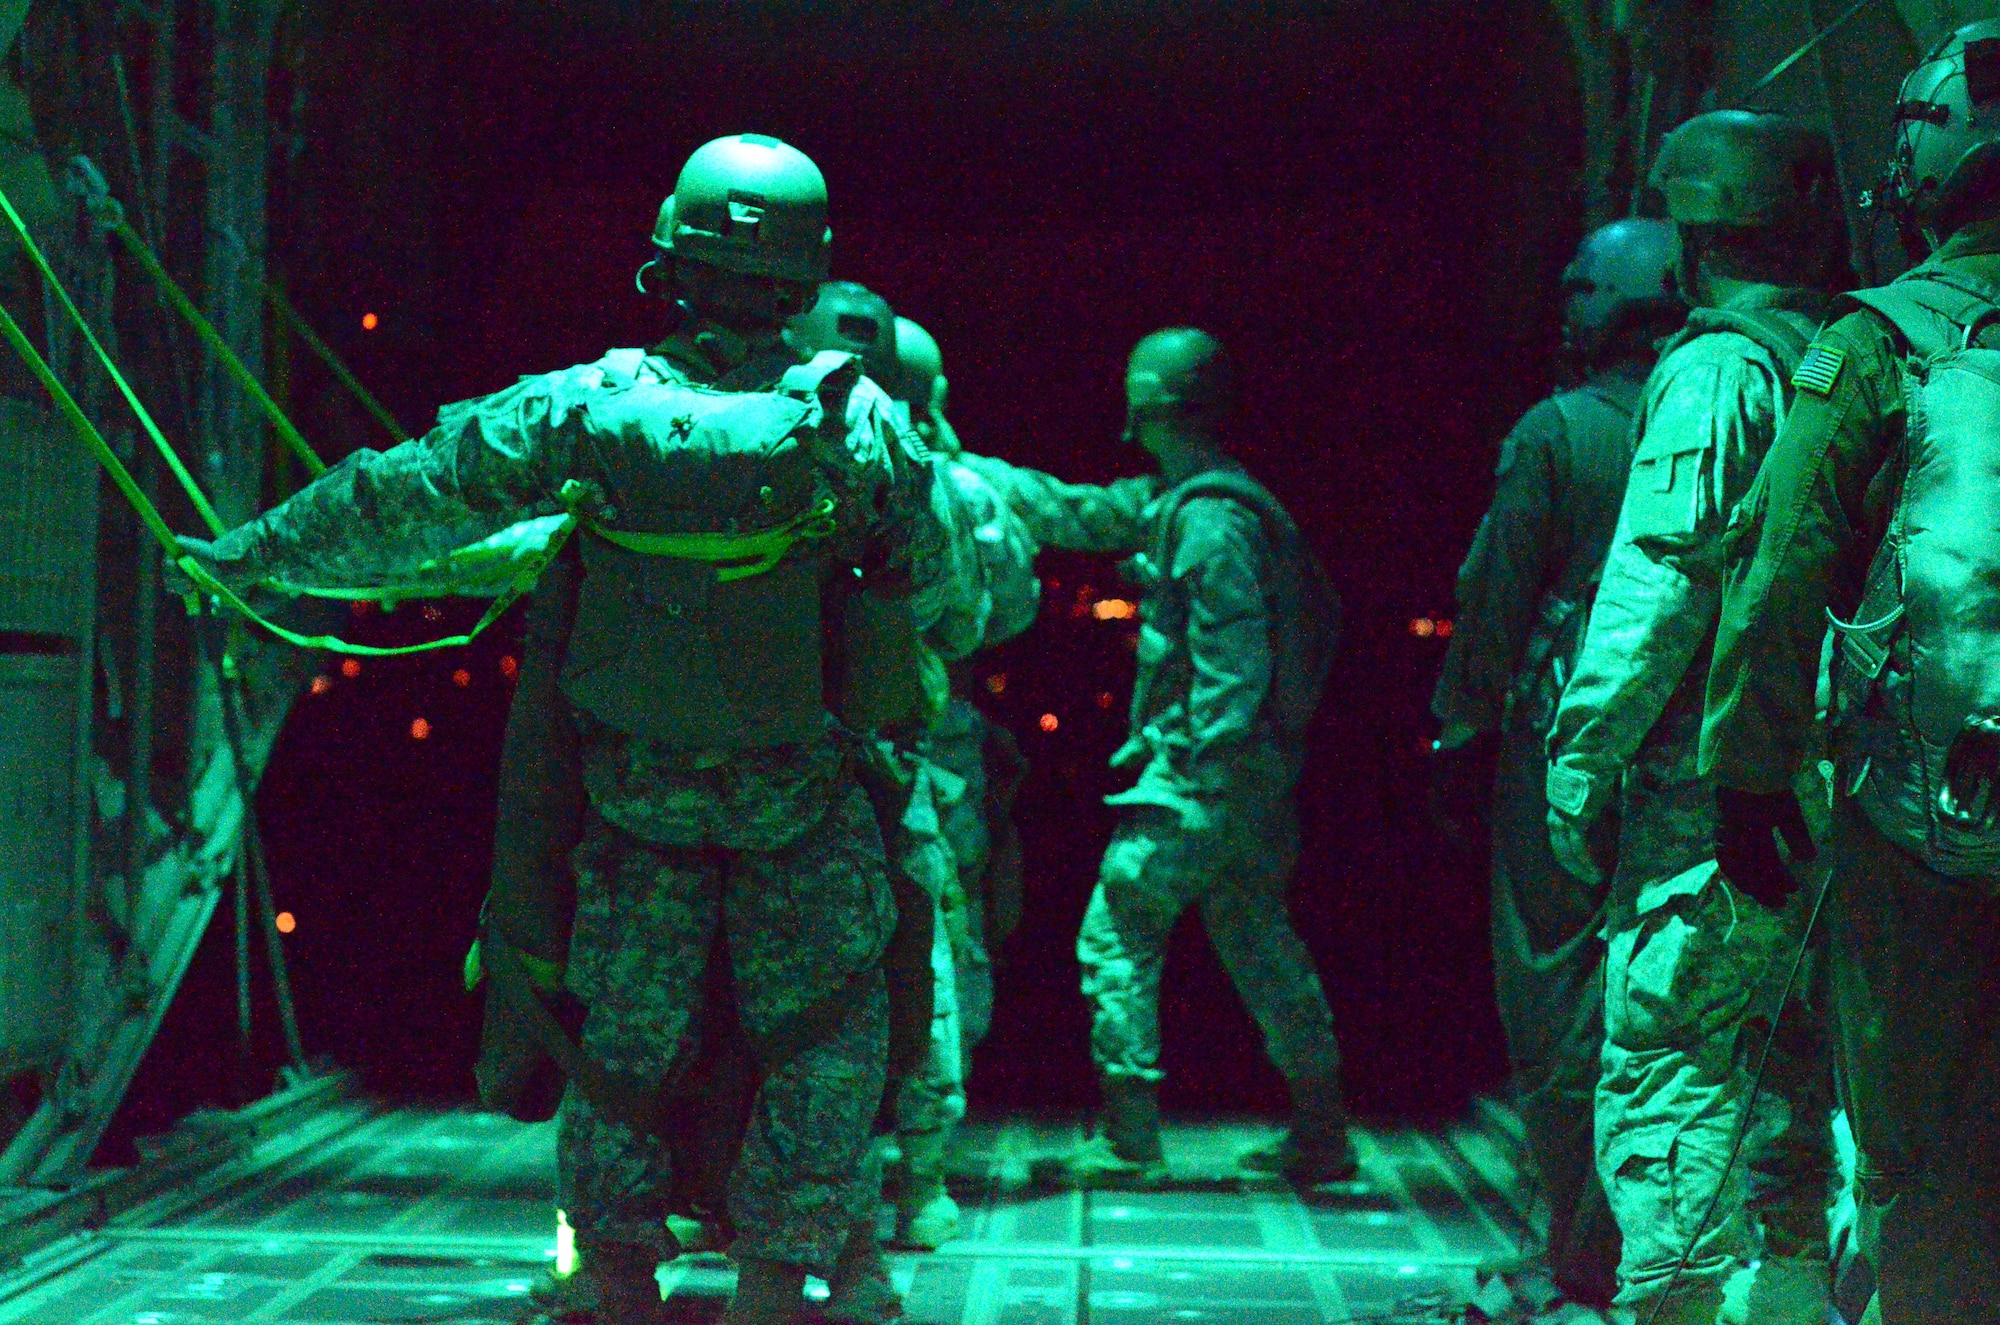 The 160th Special Operations Aviation Regiment paratroopers prepare to jump out of an 815th Airlift Squadron C-130J to establish a Forward Army Refueling Point in support of the Operation Southern Strike exercise in South Mississippi Oct. 29, 2014. The 160th SOAR is headquartered in Fort Campbell, Kentucky. The 815th AS is an Air Force Reserve unit stationed at Keesler Air Force Base in Biloxi, Mississippi. Master Sgt. Brian Lamar/U.S. Air Force photo.